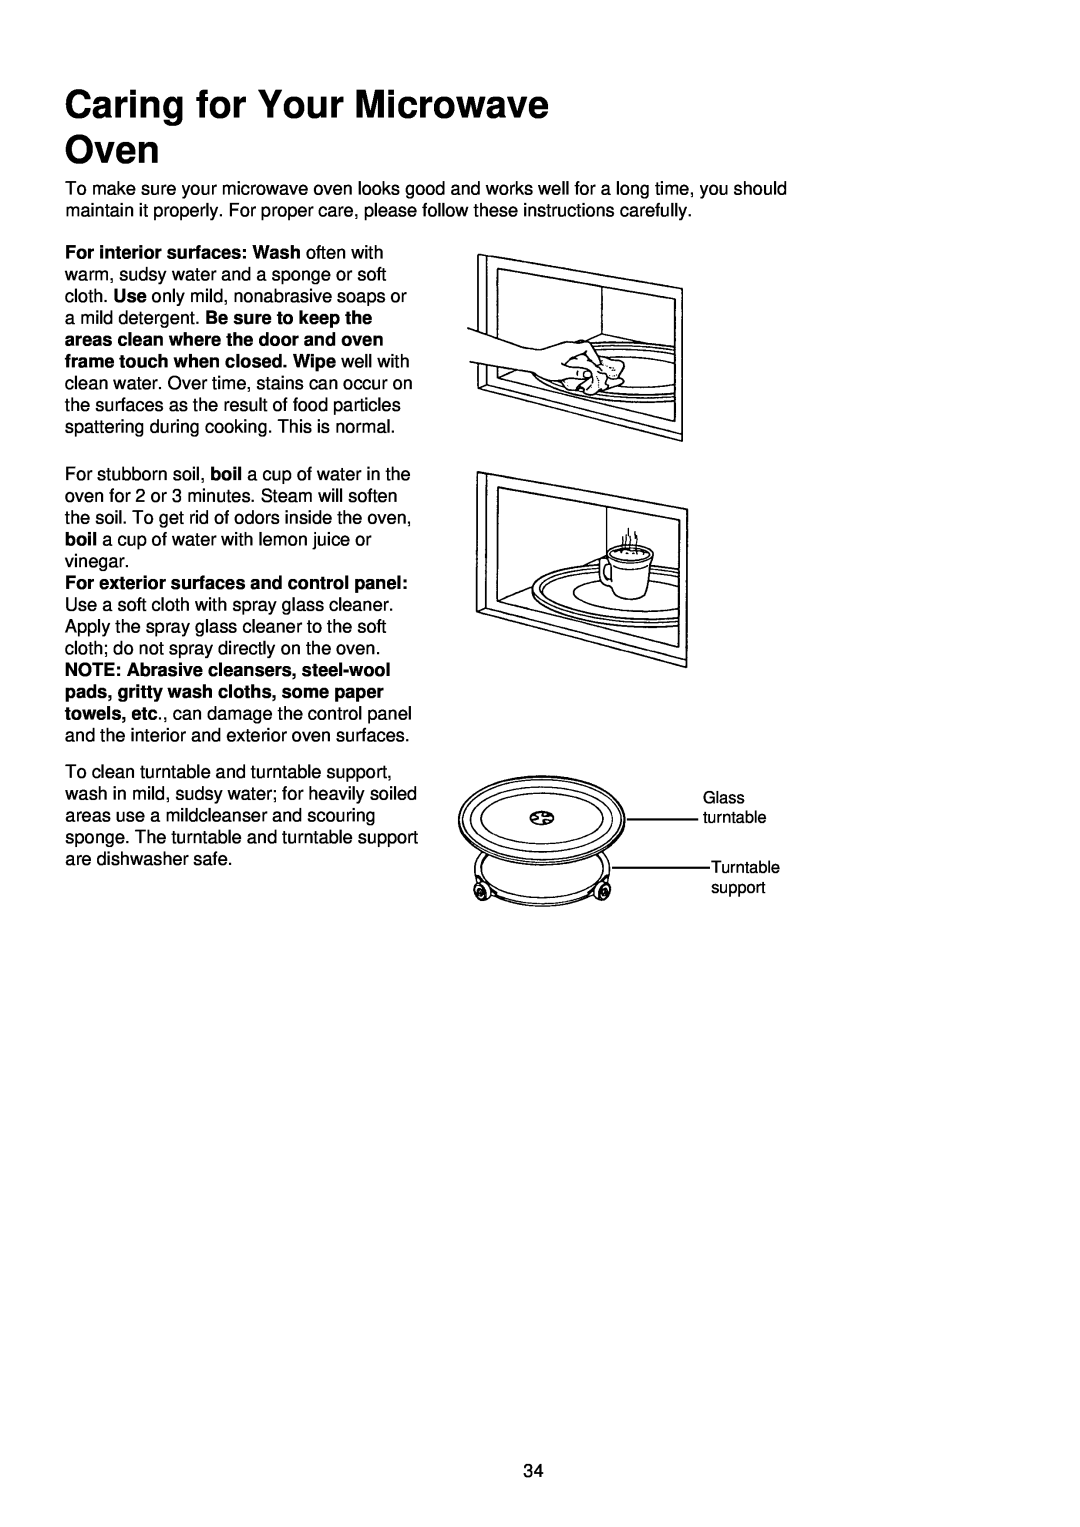 Palsonic PMO-850, PMO-888 installation instructions Caring for Your Microwave Oven, Glass turntable Turntable support 